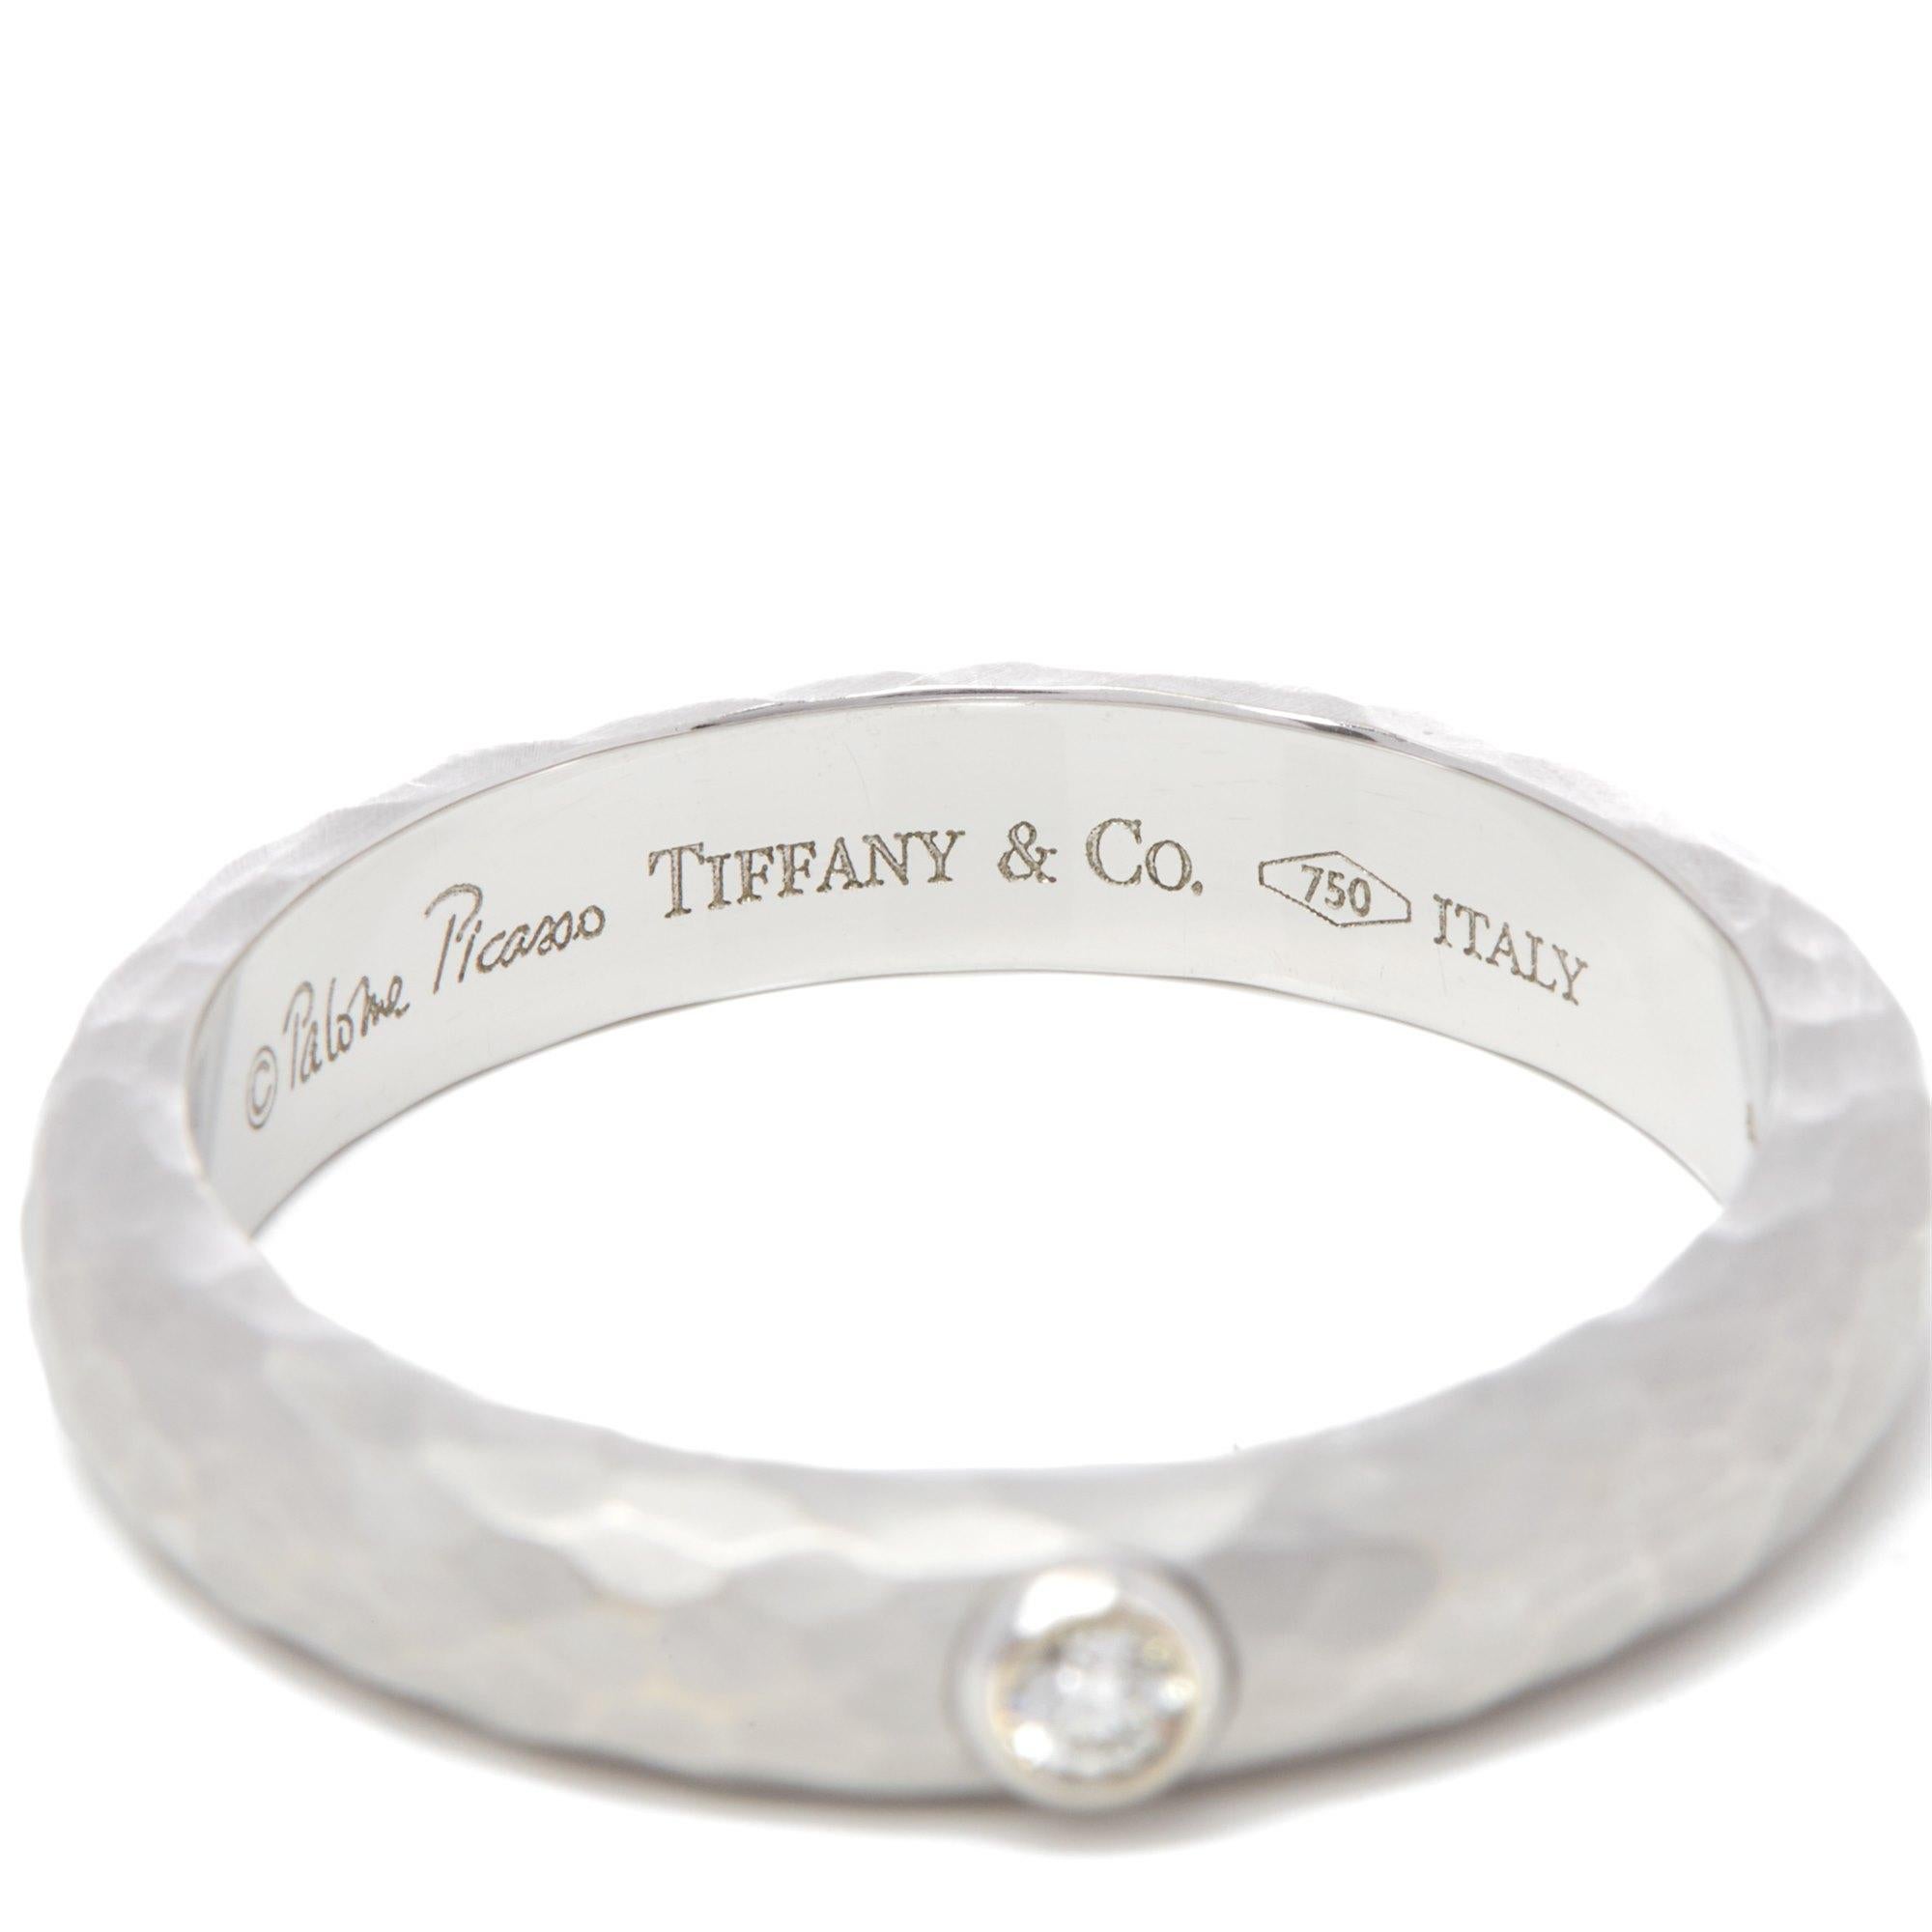 
MANUFACTURER	Tiffany & Co.
MODEL	Paloma Picasso
GENDER	Women's
ACCOMPANIED BY	Box Only
UK RING SIZE	T
EU RING SIZE	61
US RING SIZE	10
BAND WIDTH	4.23mm
TOTAL WEIGHT	7.97g
PRIMARY STONE QUANTITY	1
PRIMARY STONE CARAT WEIGHT	0.05cts
PRIMARY STONE